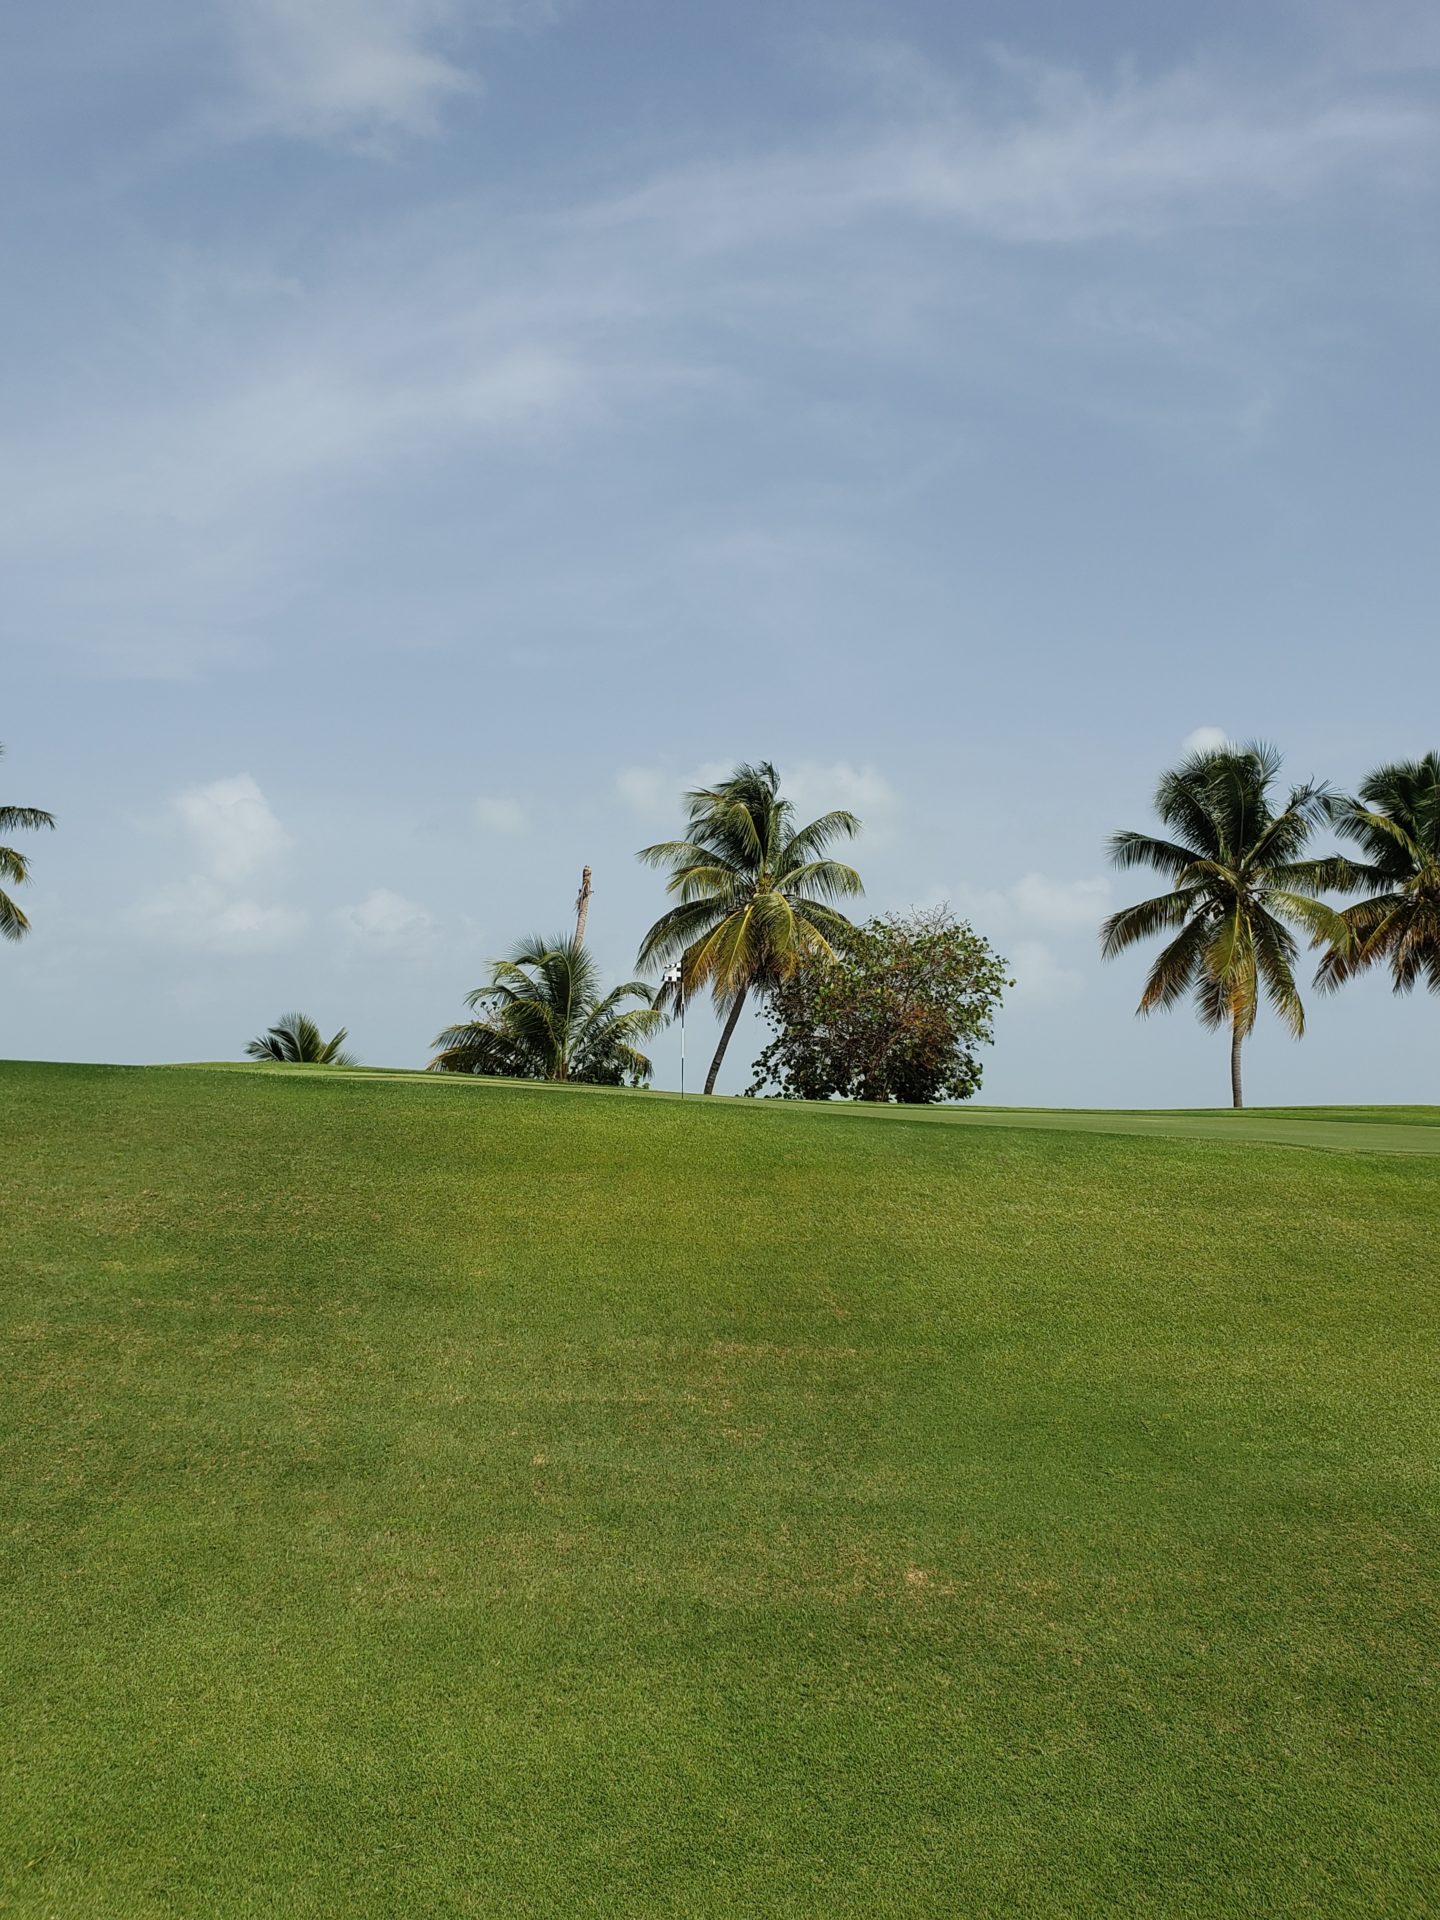 a palm trees on a golf course